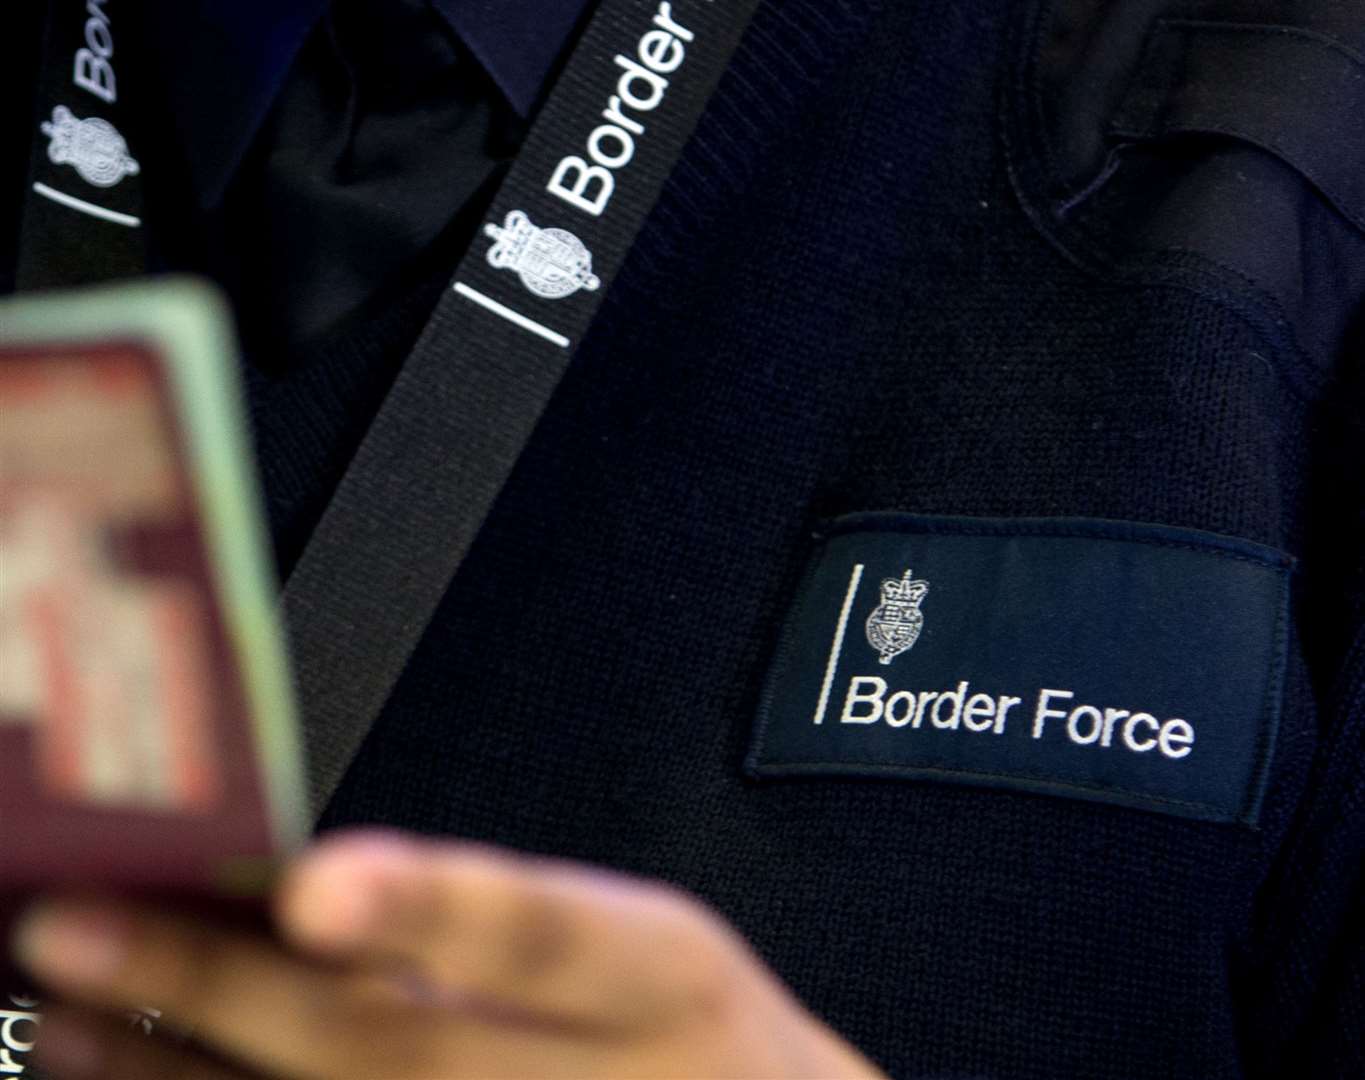 A Border Force officer has appeared in court. Library image.